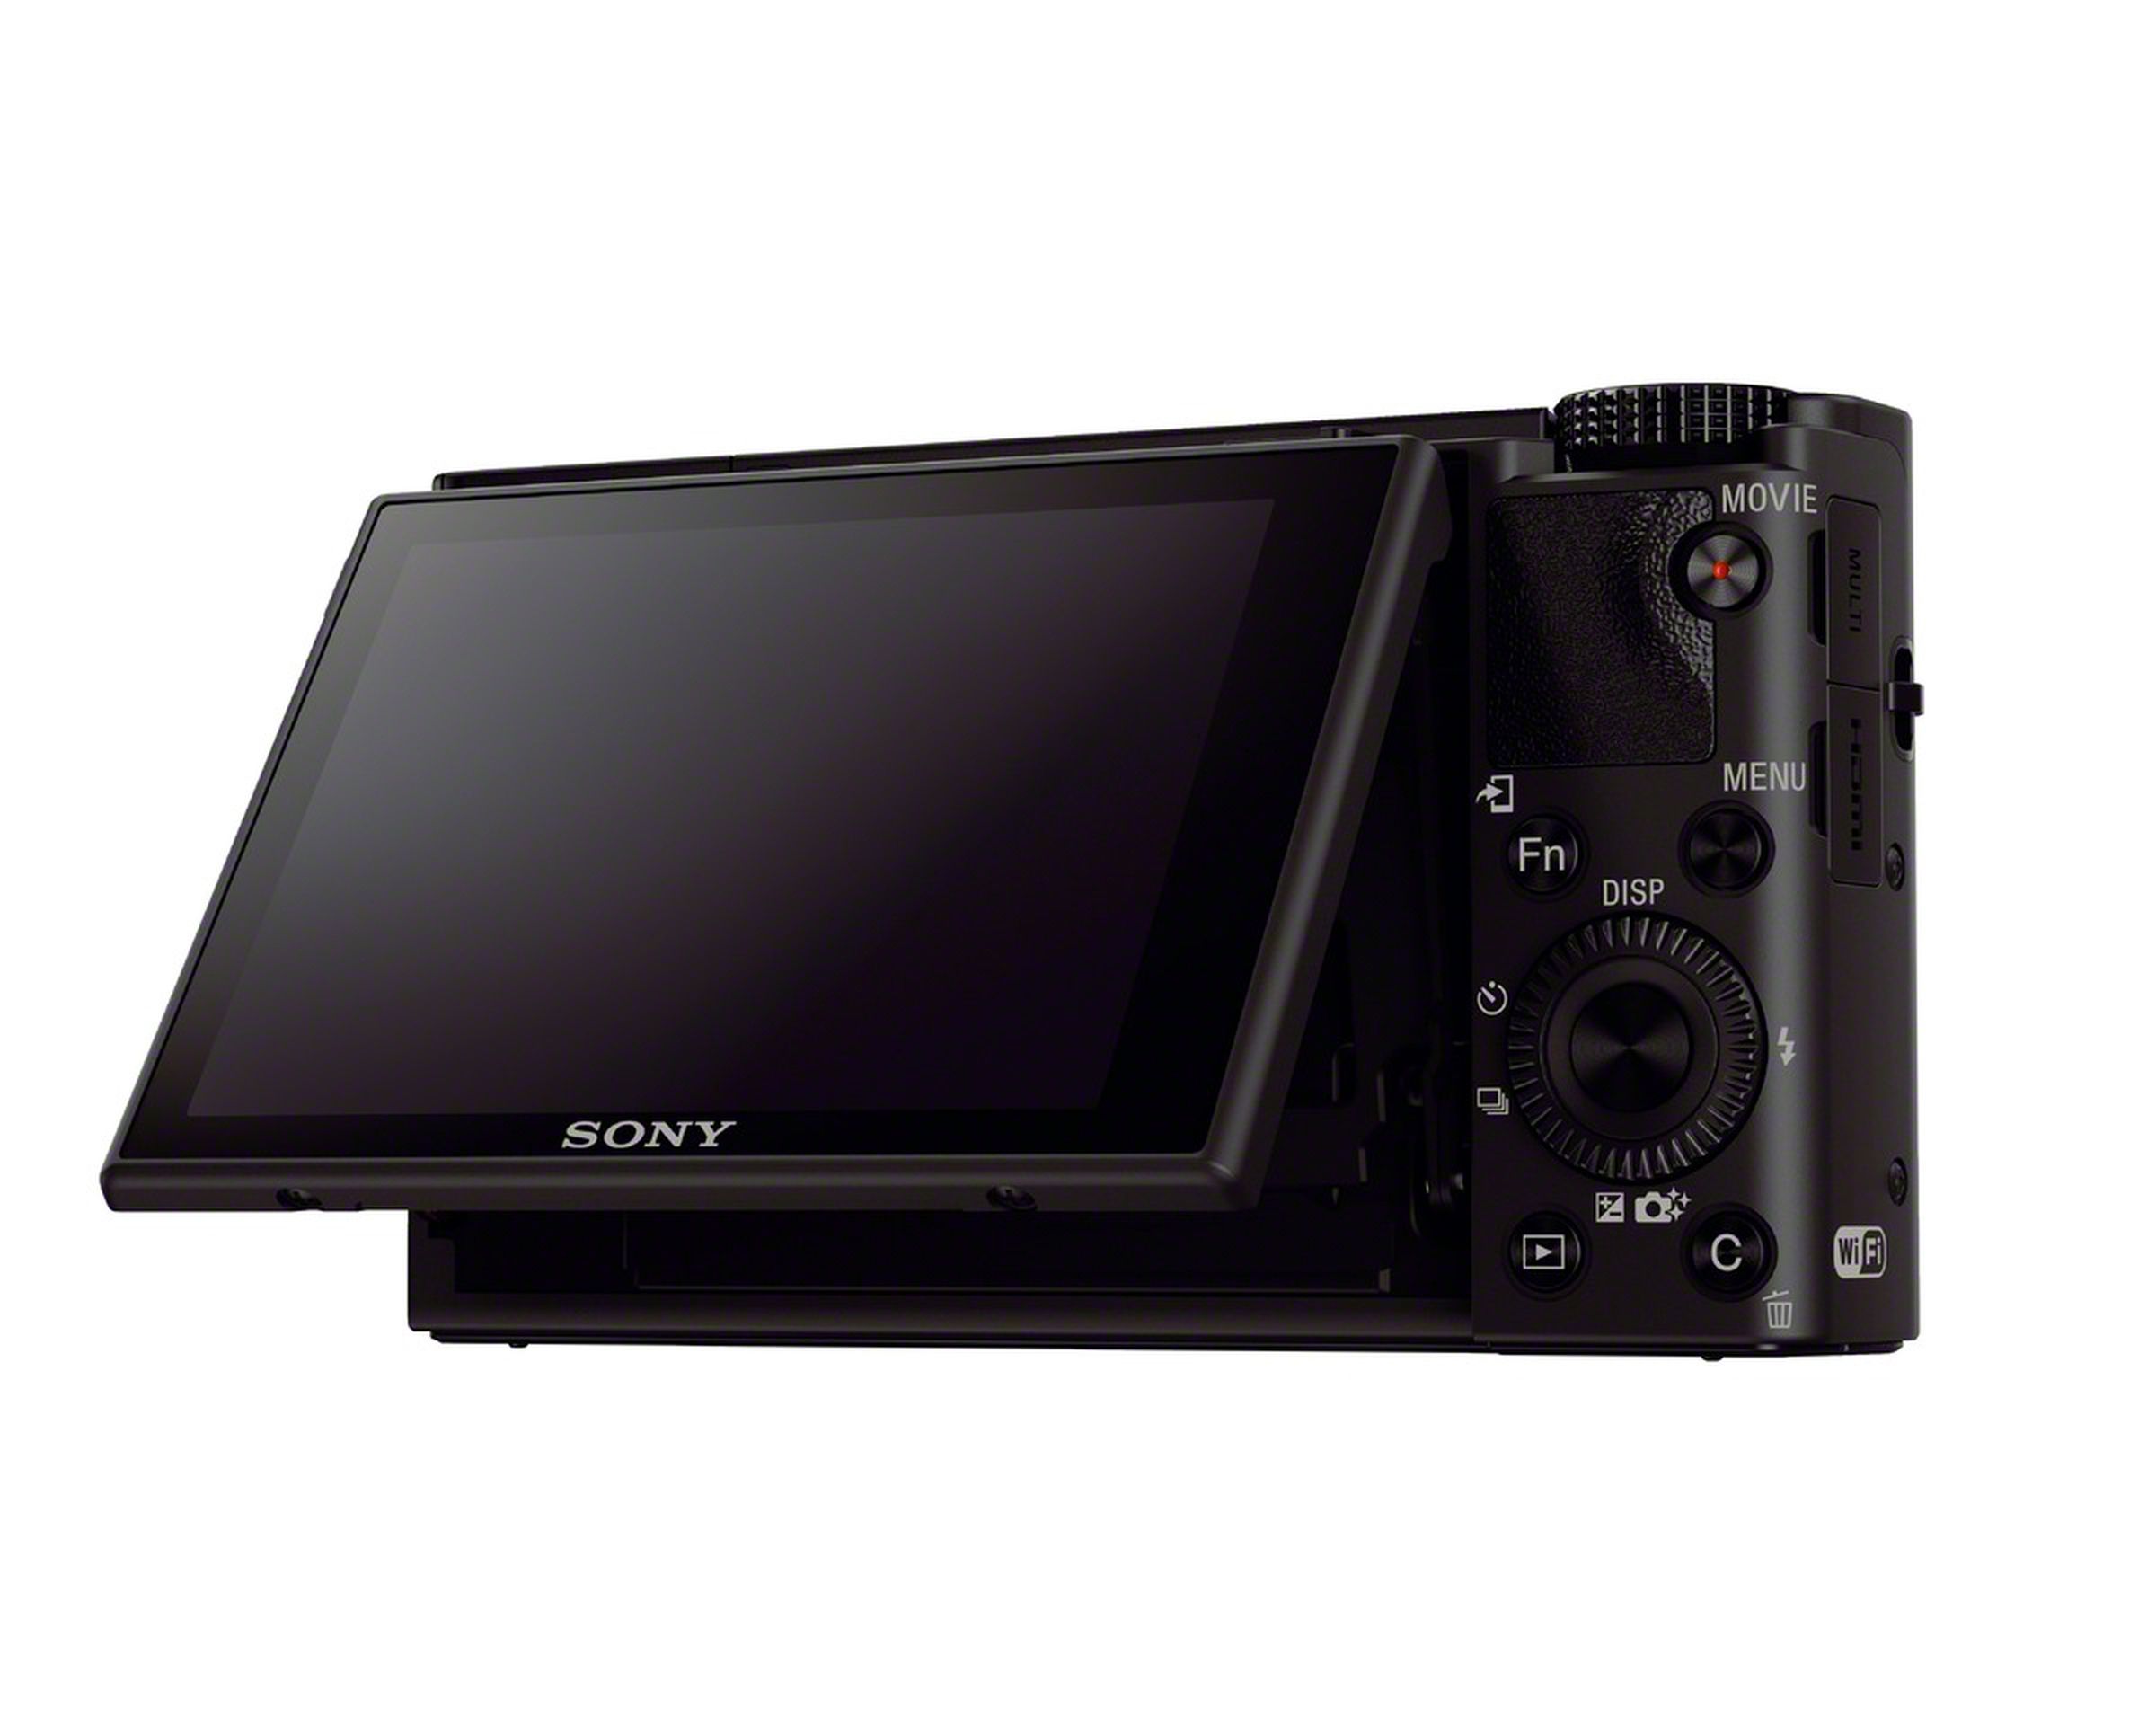 Sony RX100M3 images